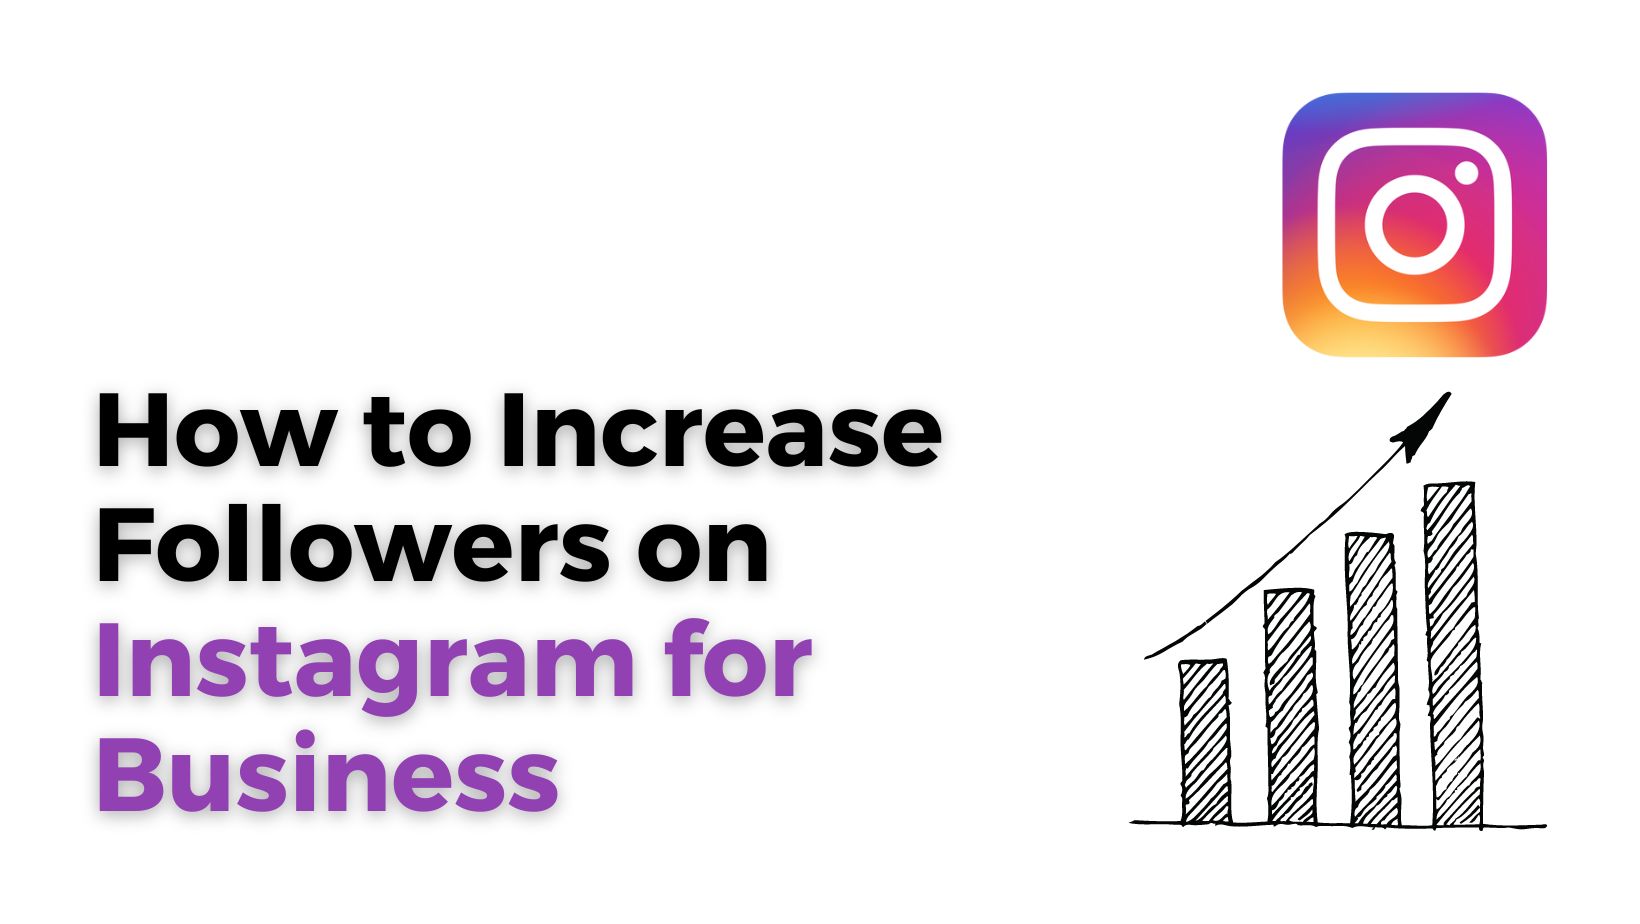 How to Increase Followers on Instagram for Business